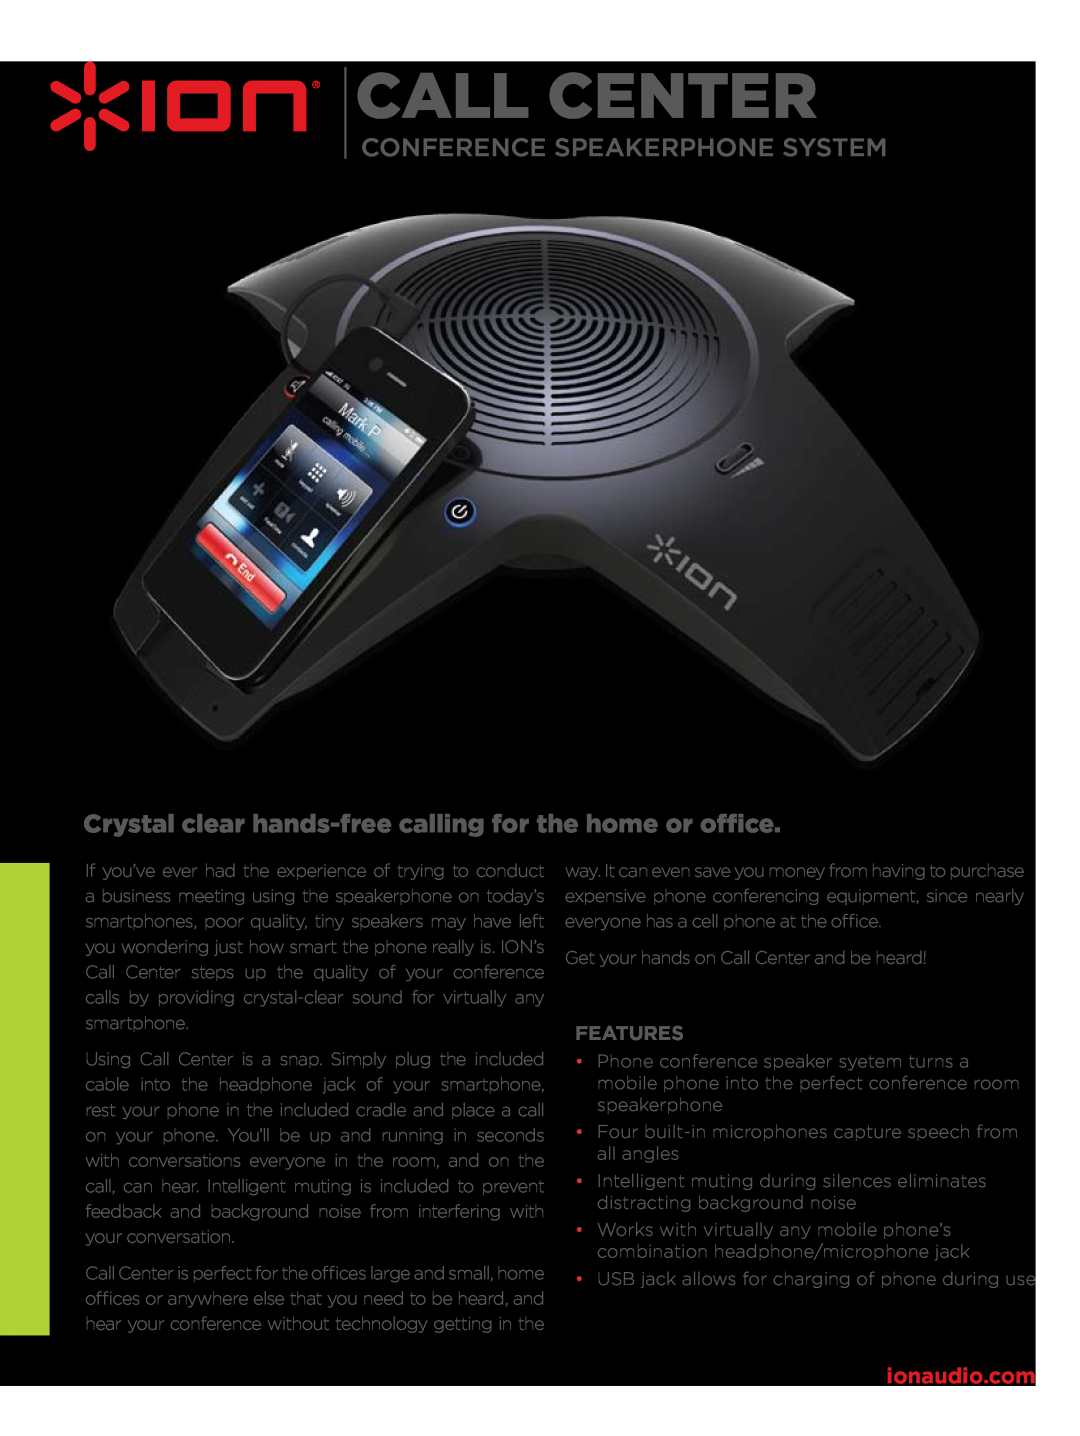 ION Call Center specifications Conference Speakerphone System, Crystal clear hands-free calling for the home or office 